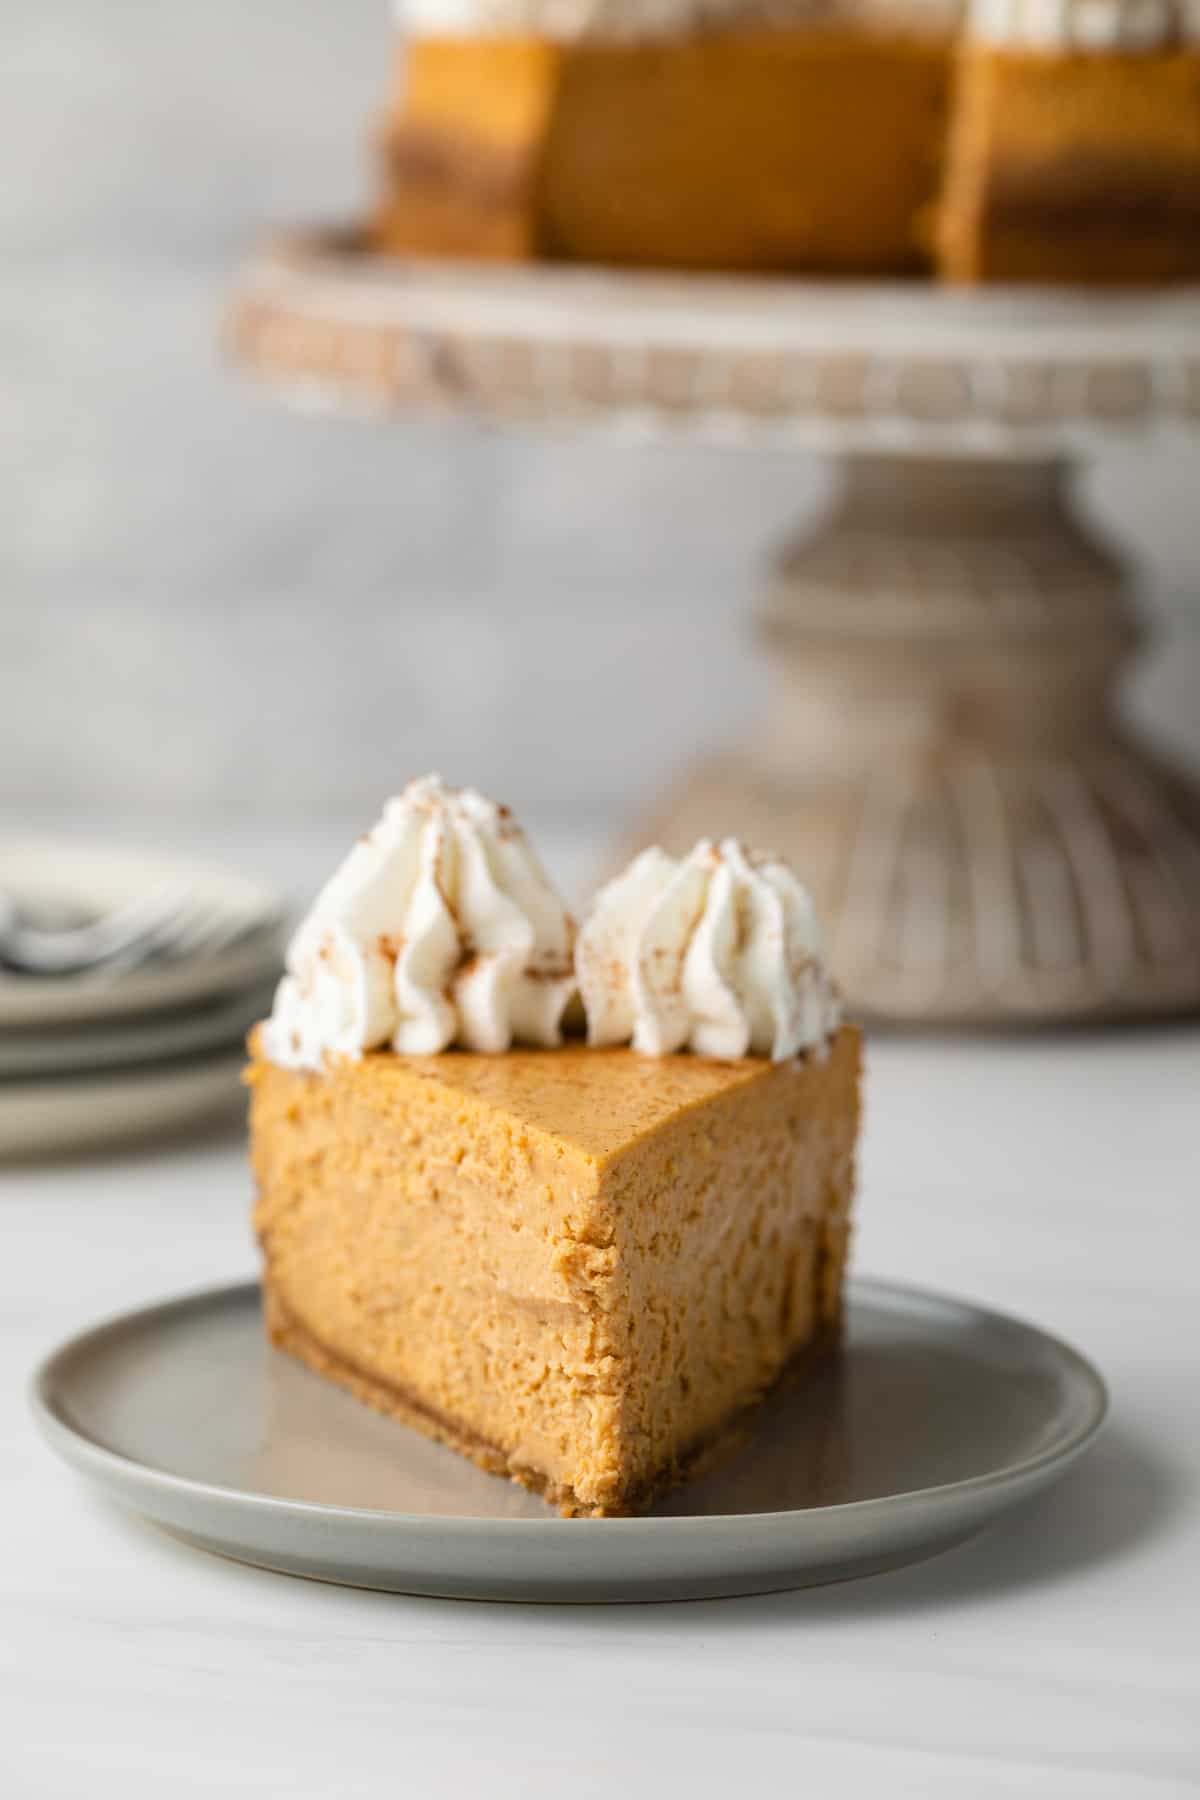 Slice of pumpkin cheesecake on a plate.